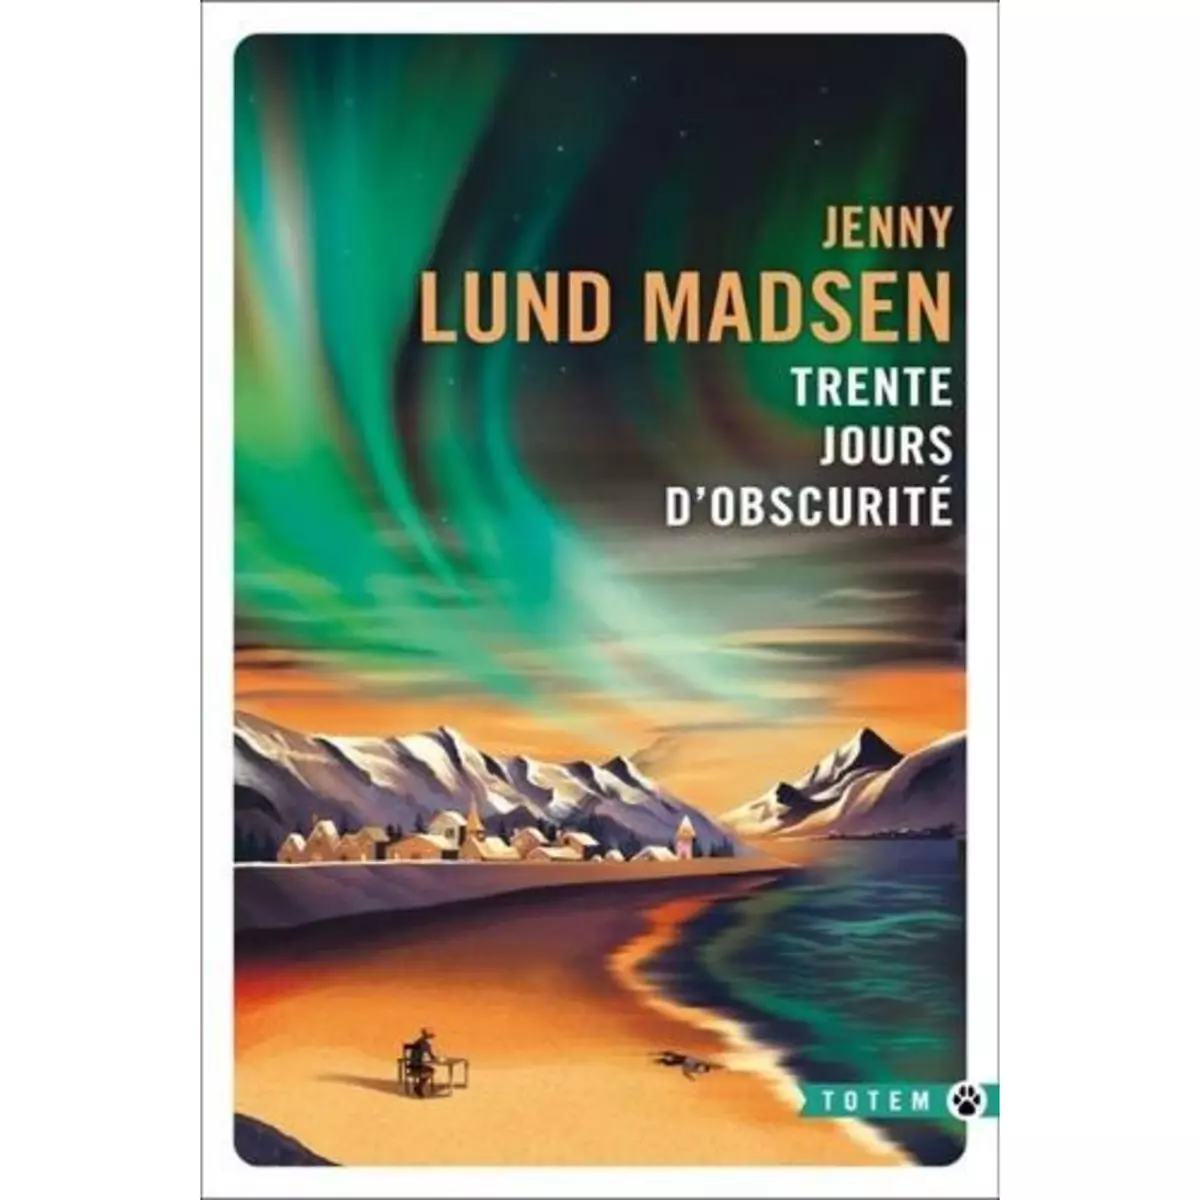  TRENTE JOURS D'OBSCURITE, Lund Madsen Jenny